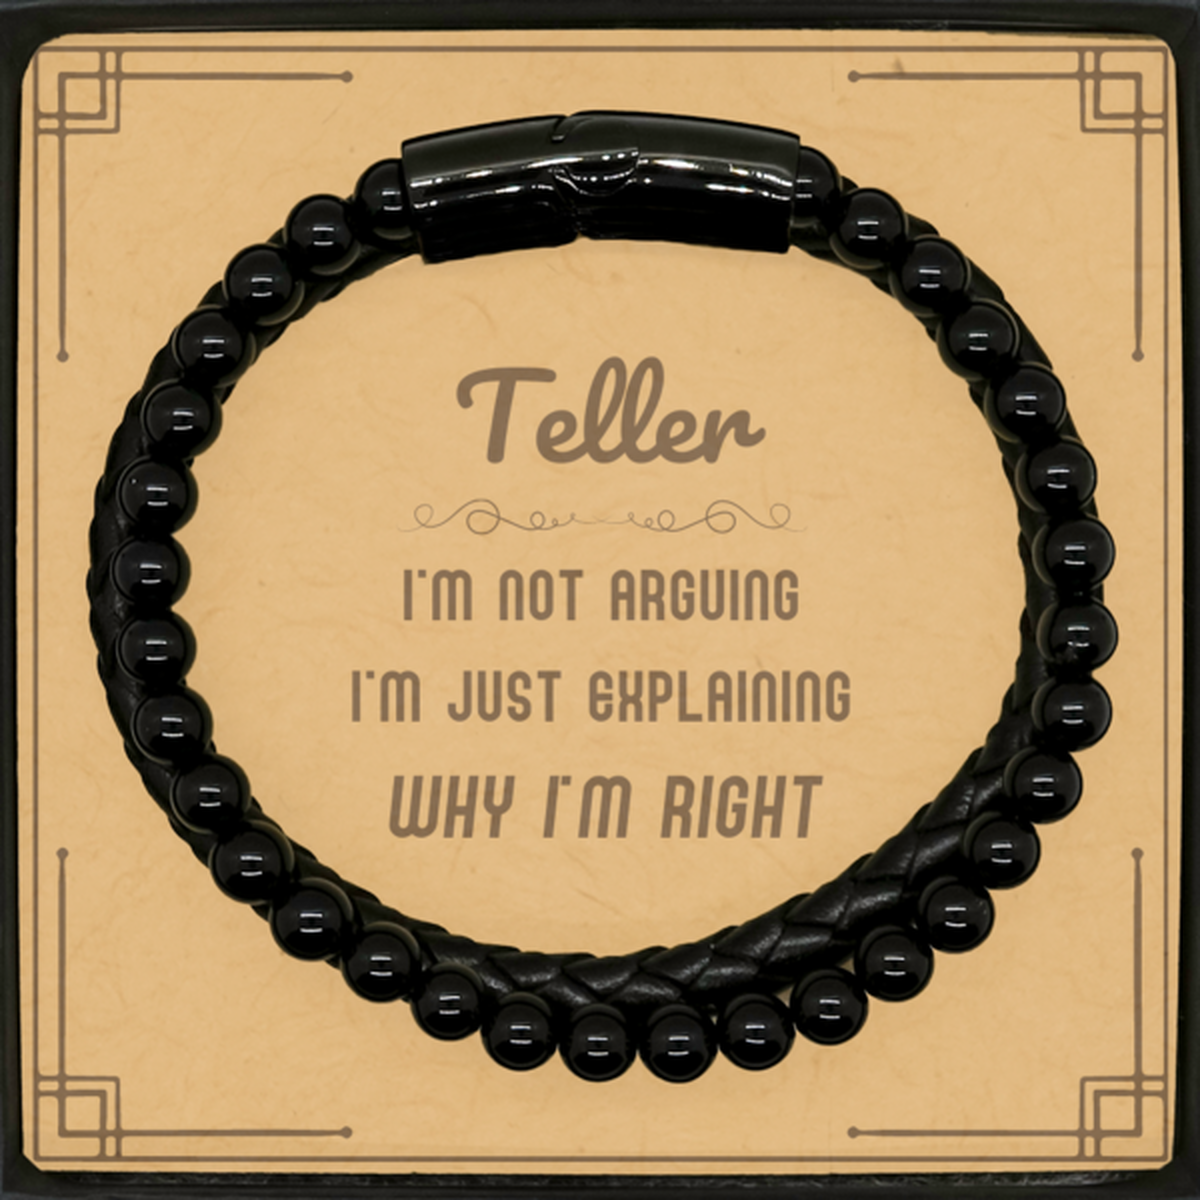 Teller I'm not Arguing. I'm Just Explaining Why I'm RIGHT Stone Leather Bracelets, Funny Saying Quote Teller Gifts For Teller Message Card Graduation Birthday Christmas Gifts for Men Women Coworker